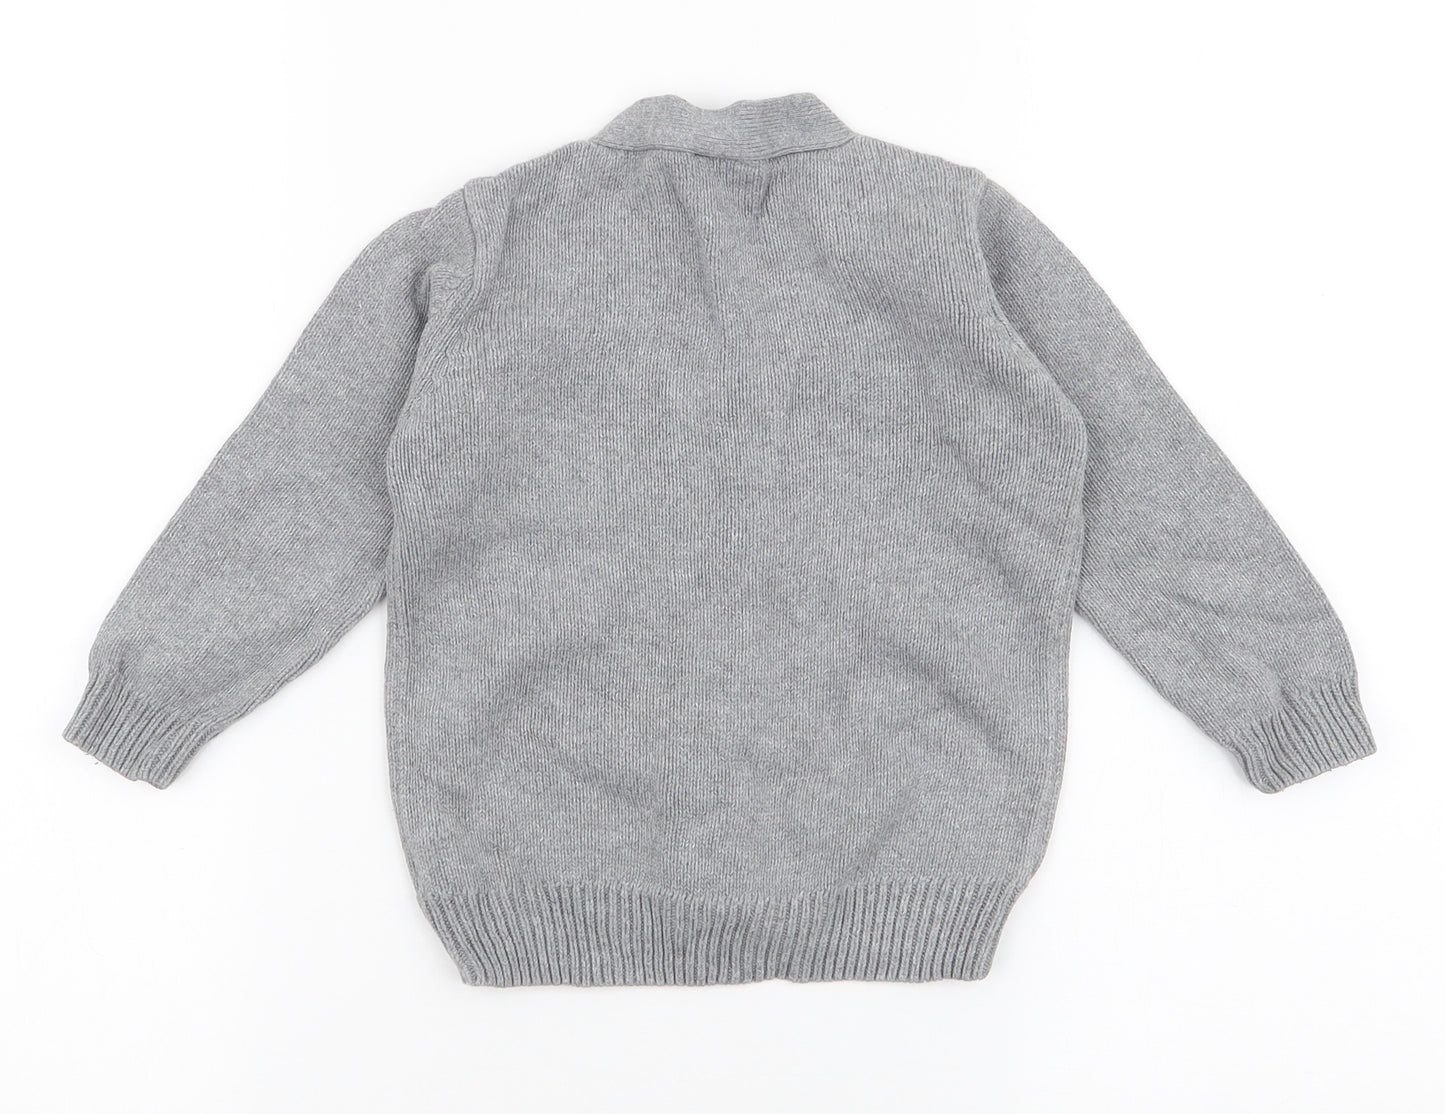 Pointer Boys Grey V-Neck  Polyester Cardigan Jumper Size 2 Years  Button